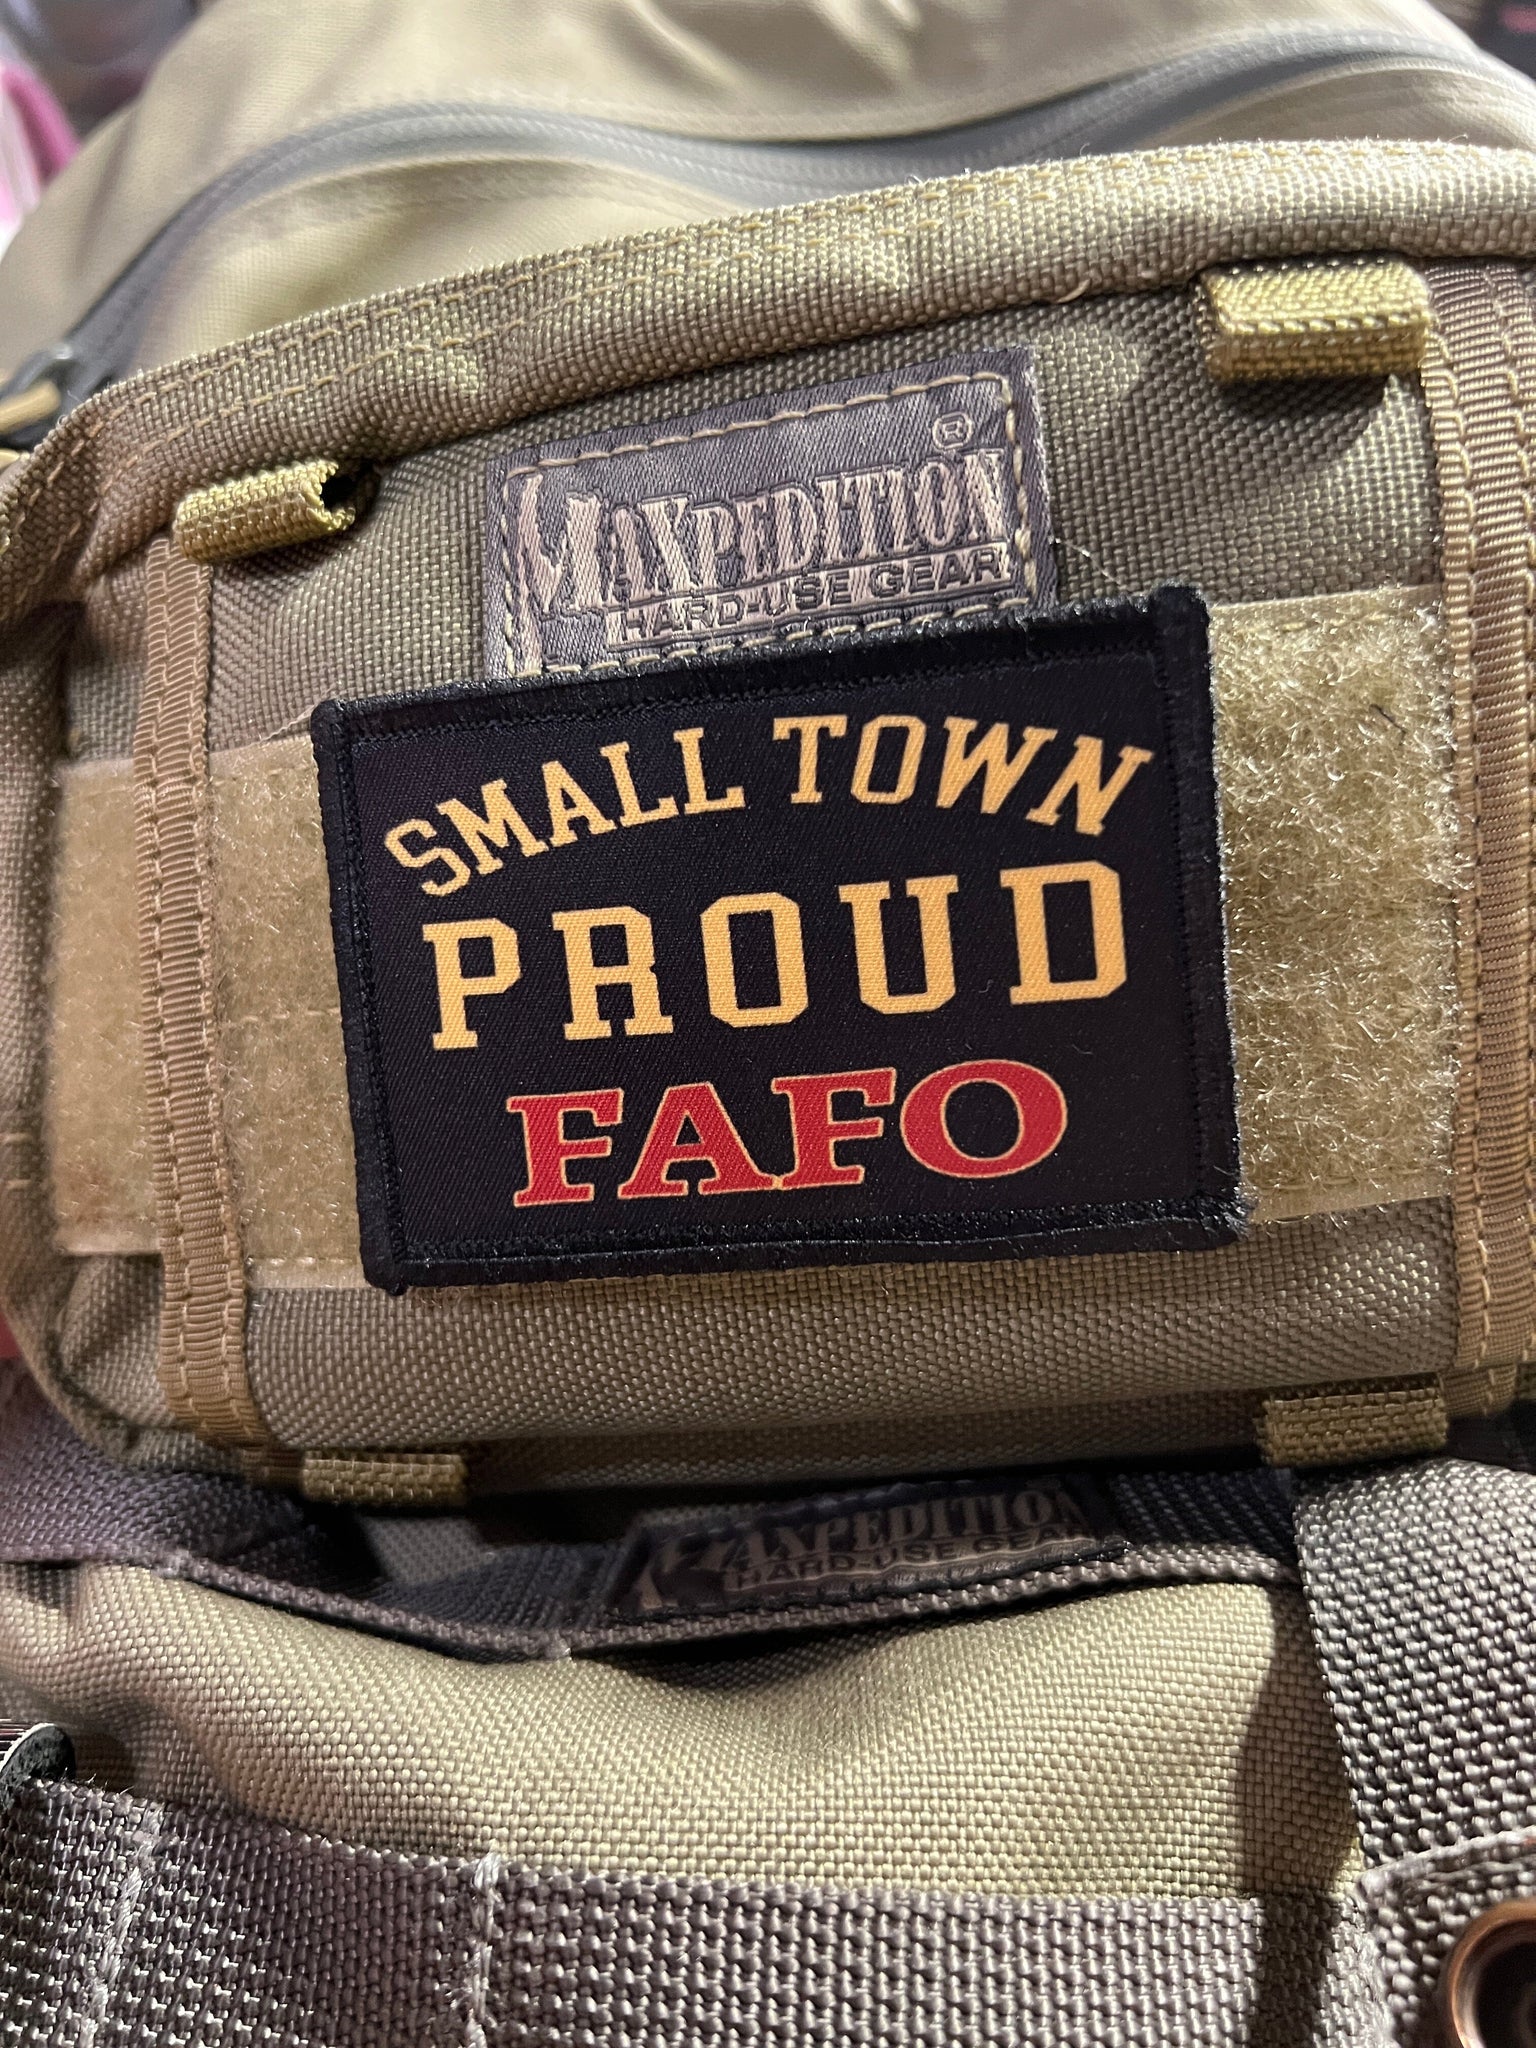 Small Town Proud Printed Patch - Warrior 12 - A Patriotic Apparel